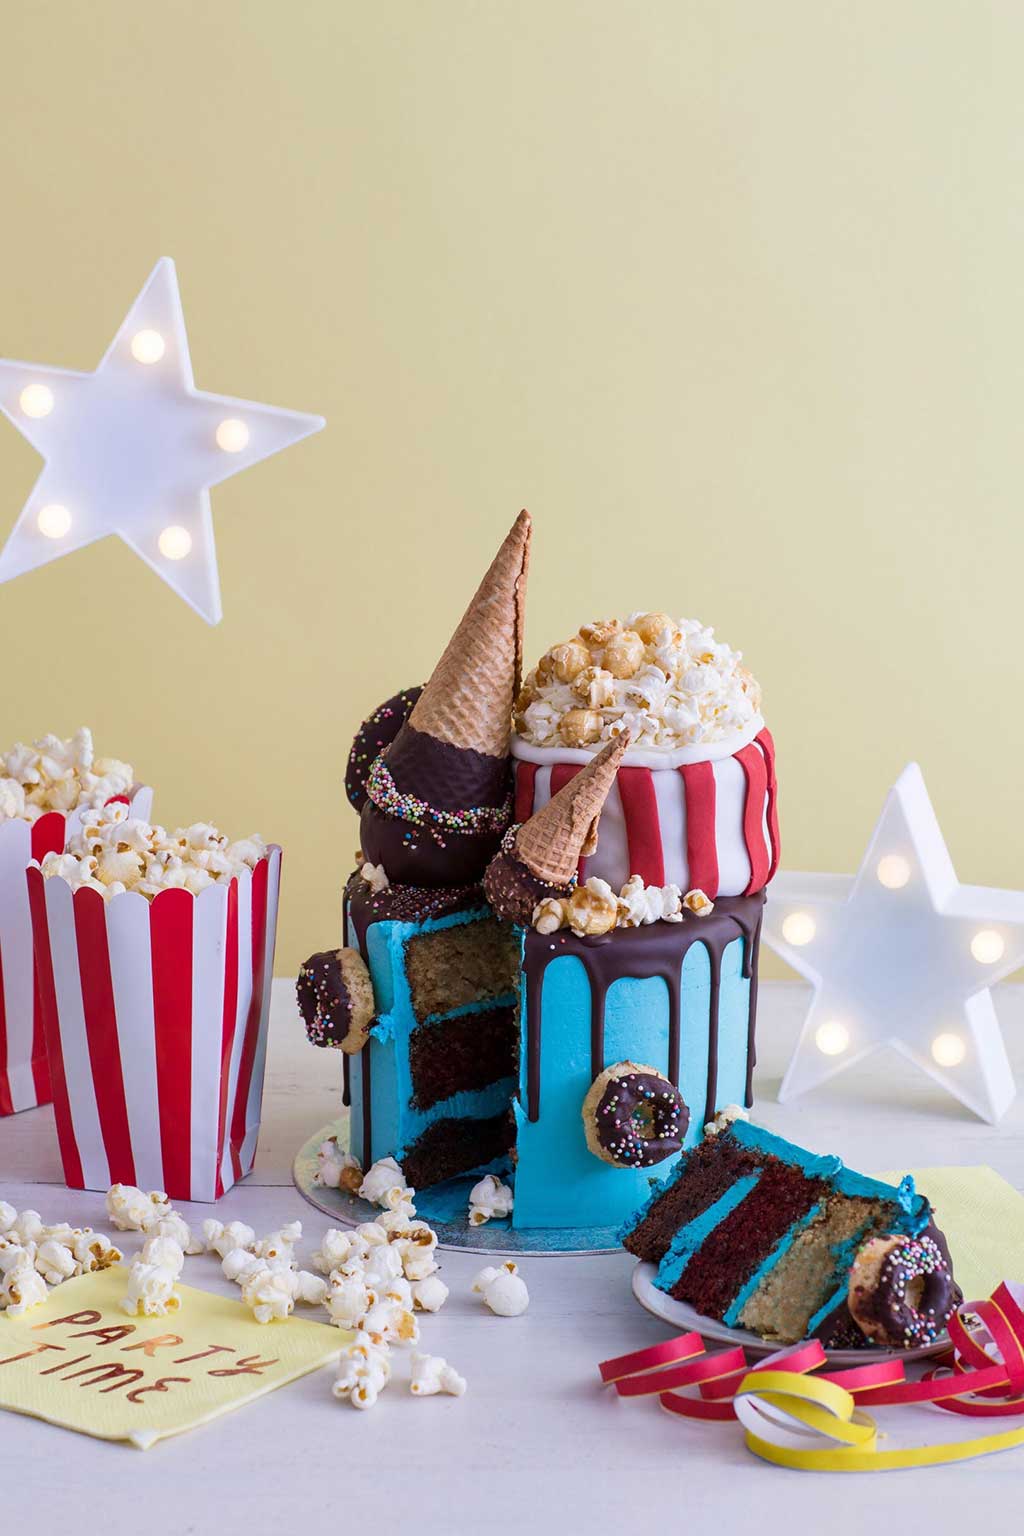 7 Tips To Throwing The Ultimate Kids Party